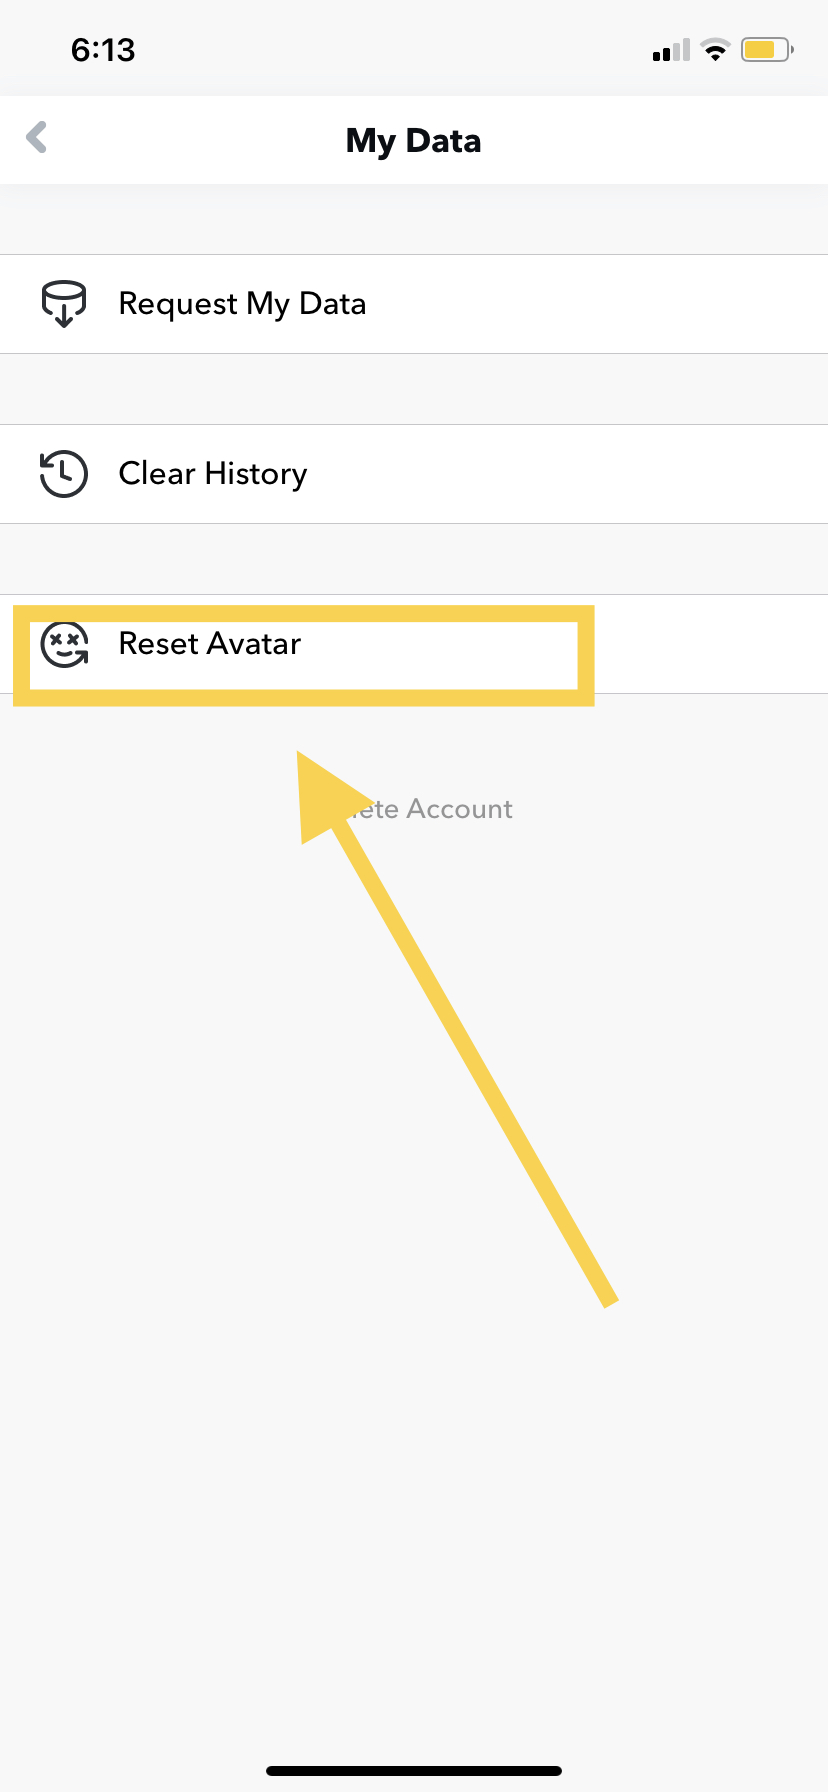 click on the "Reset Avatar"